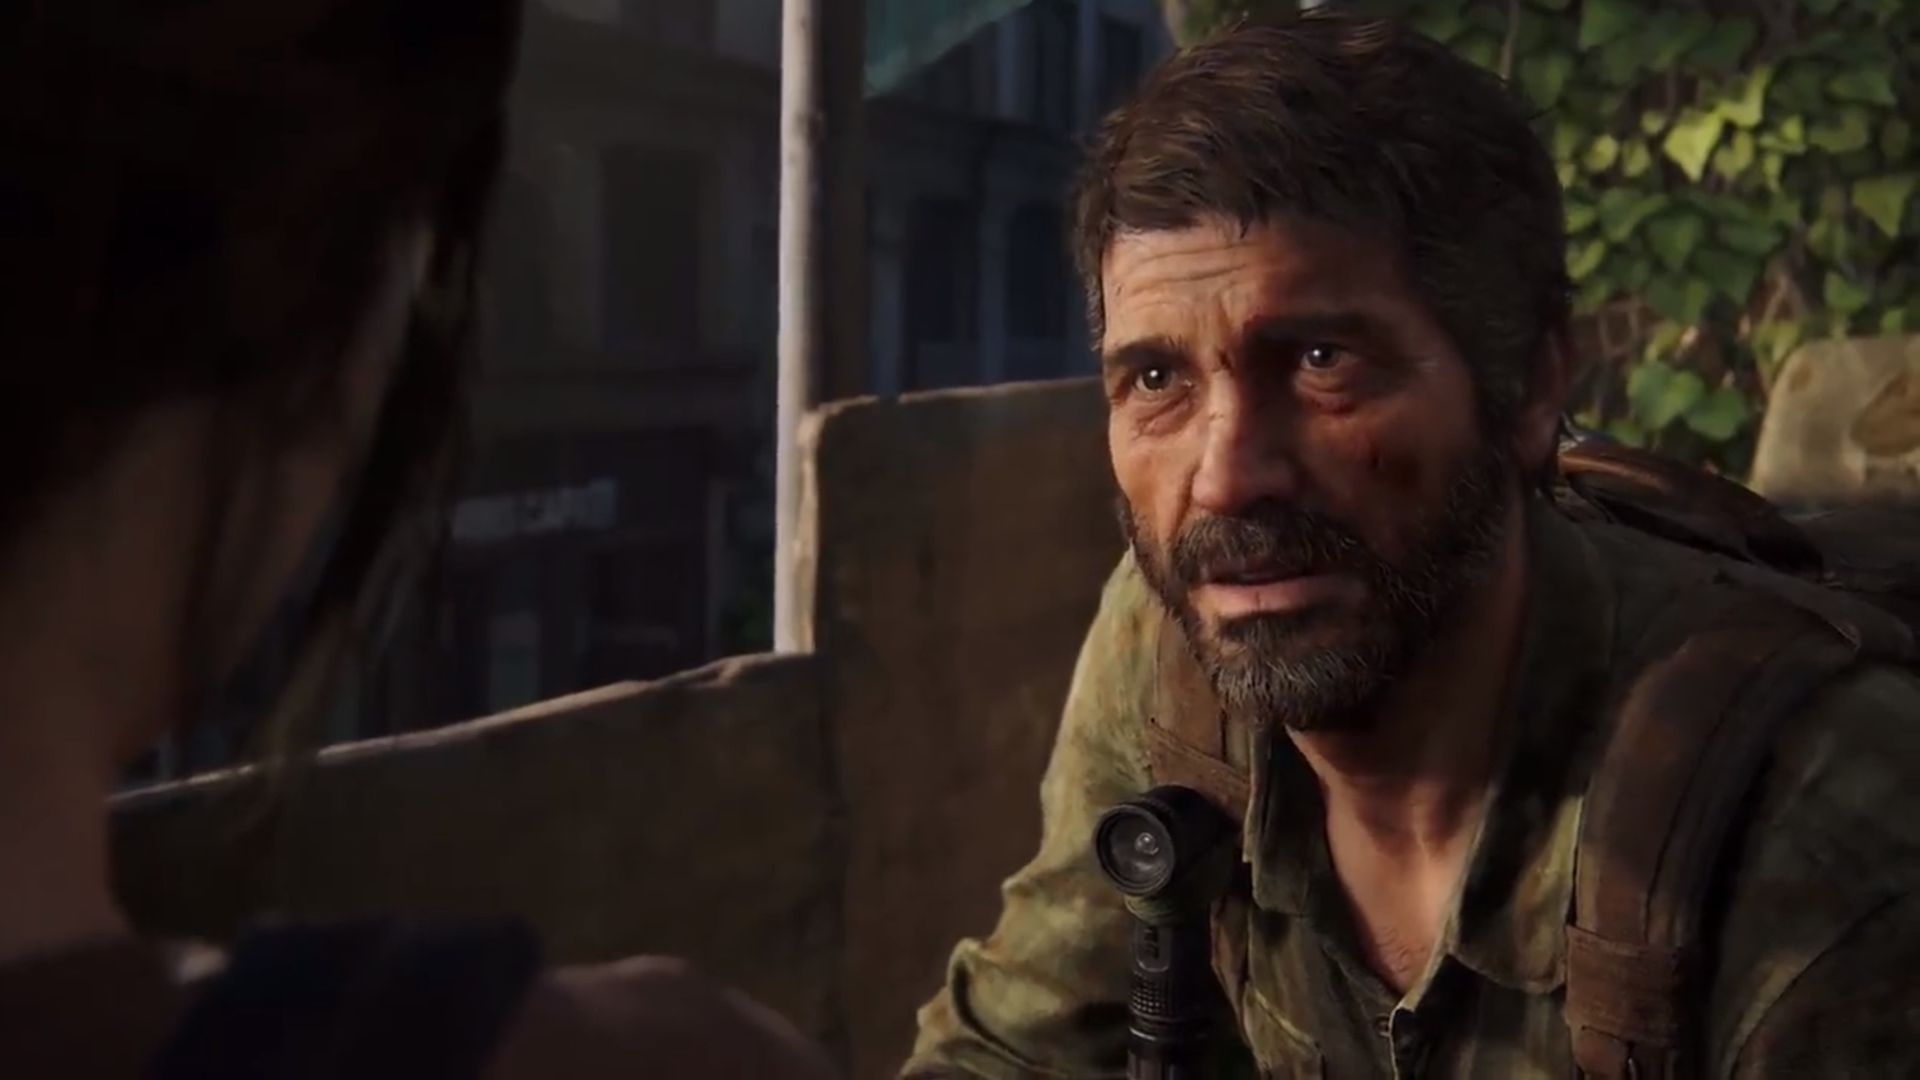 In this article, we are going to be covering when will The Last of Us Part 1 PC port be released, so you don't miss out on it when it comes out.